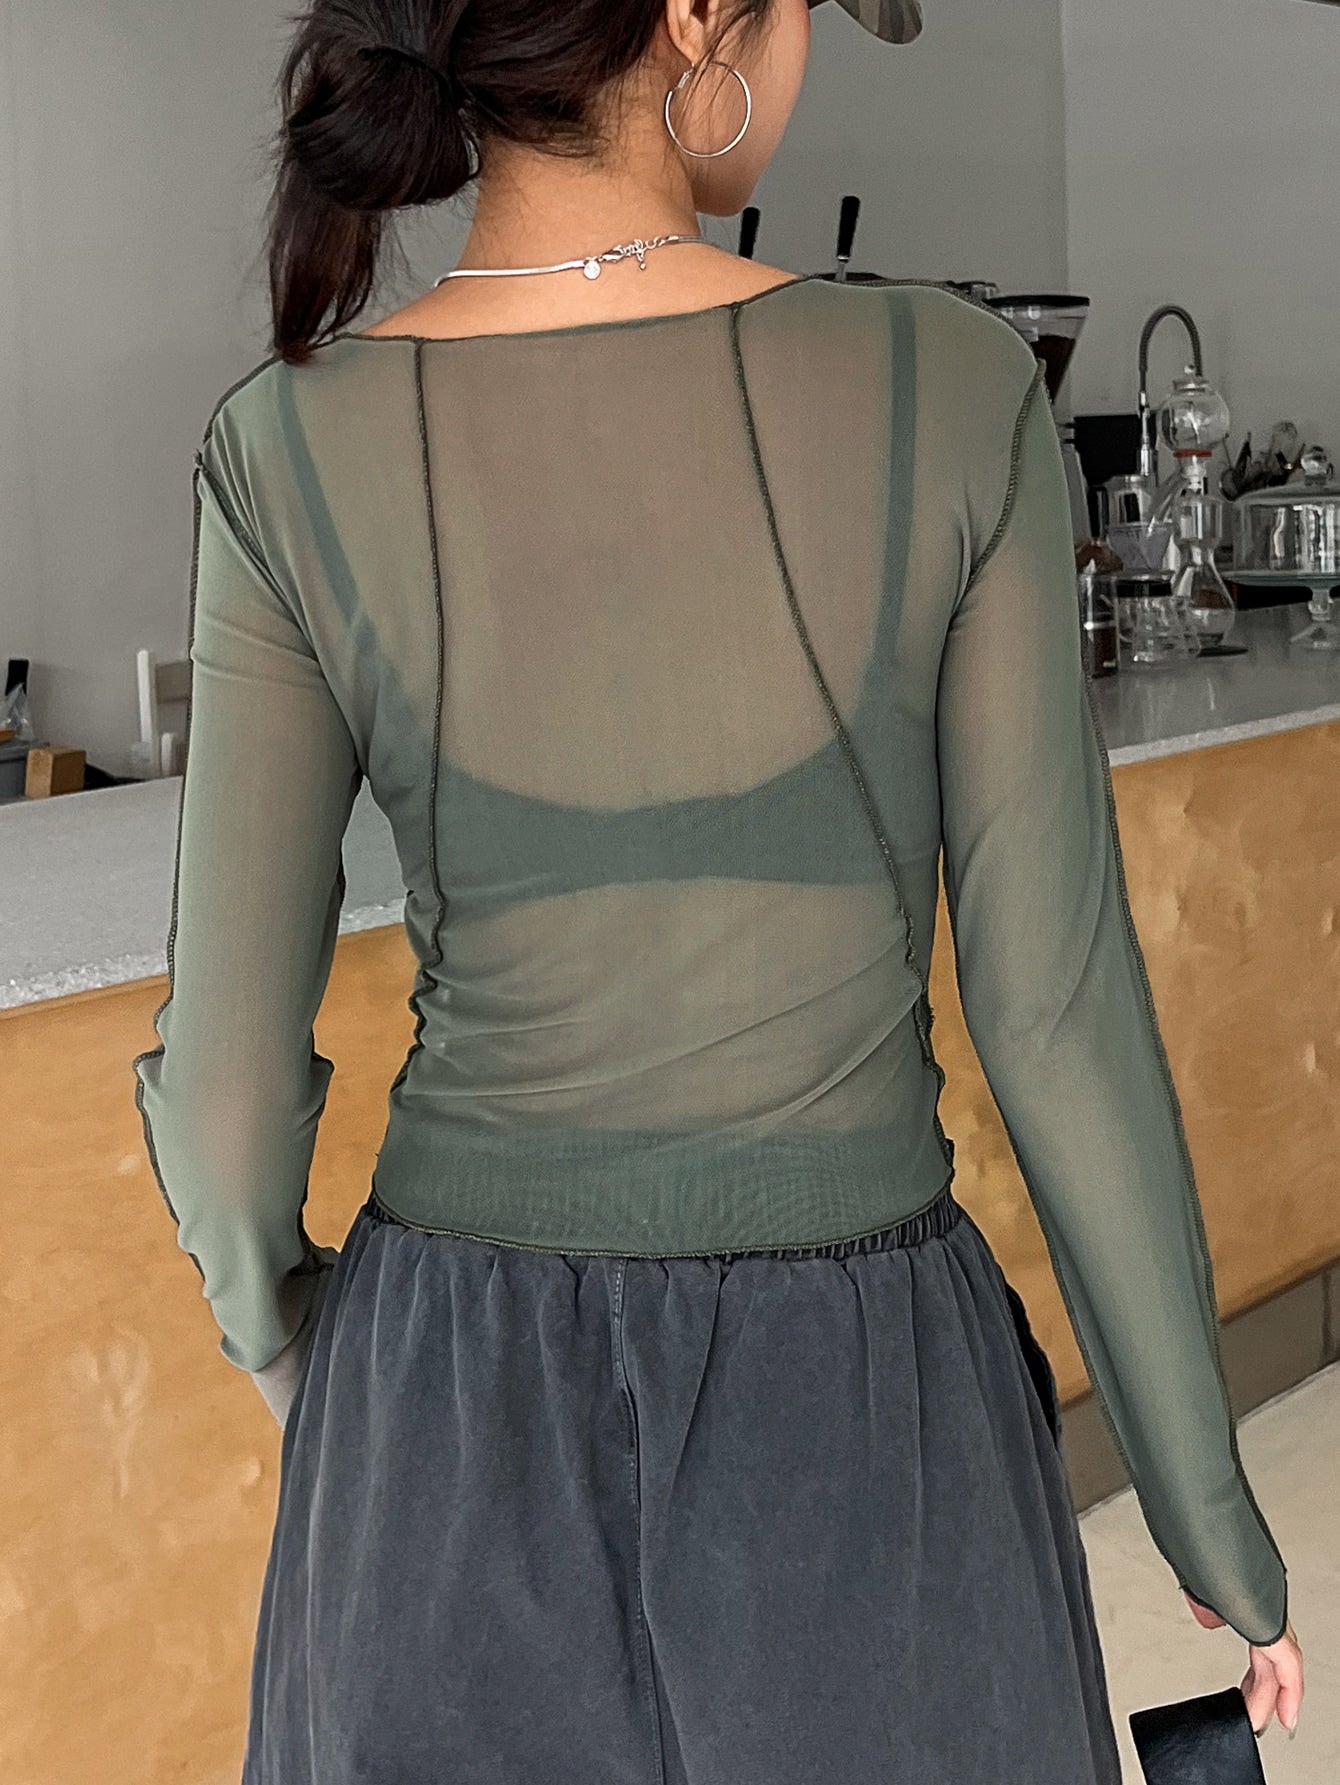 Top-stitching Sheer Top Without Bra